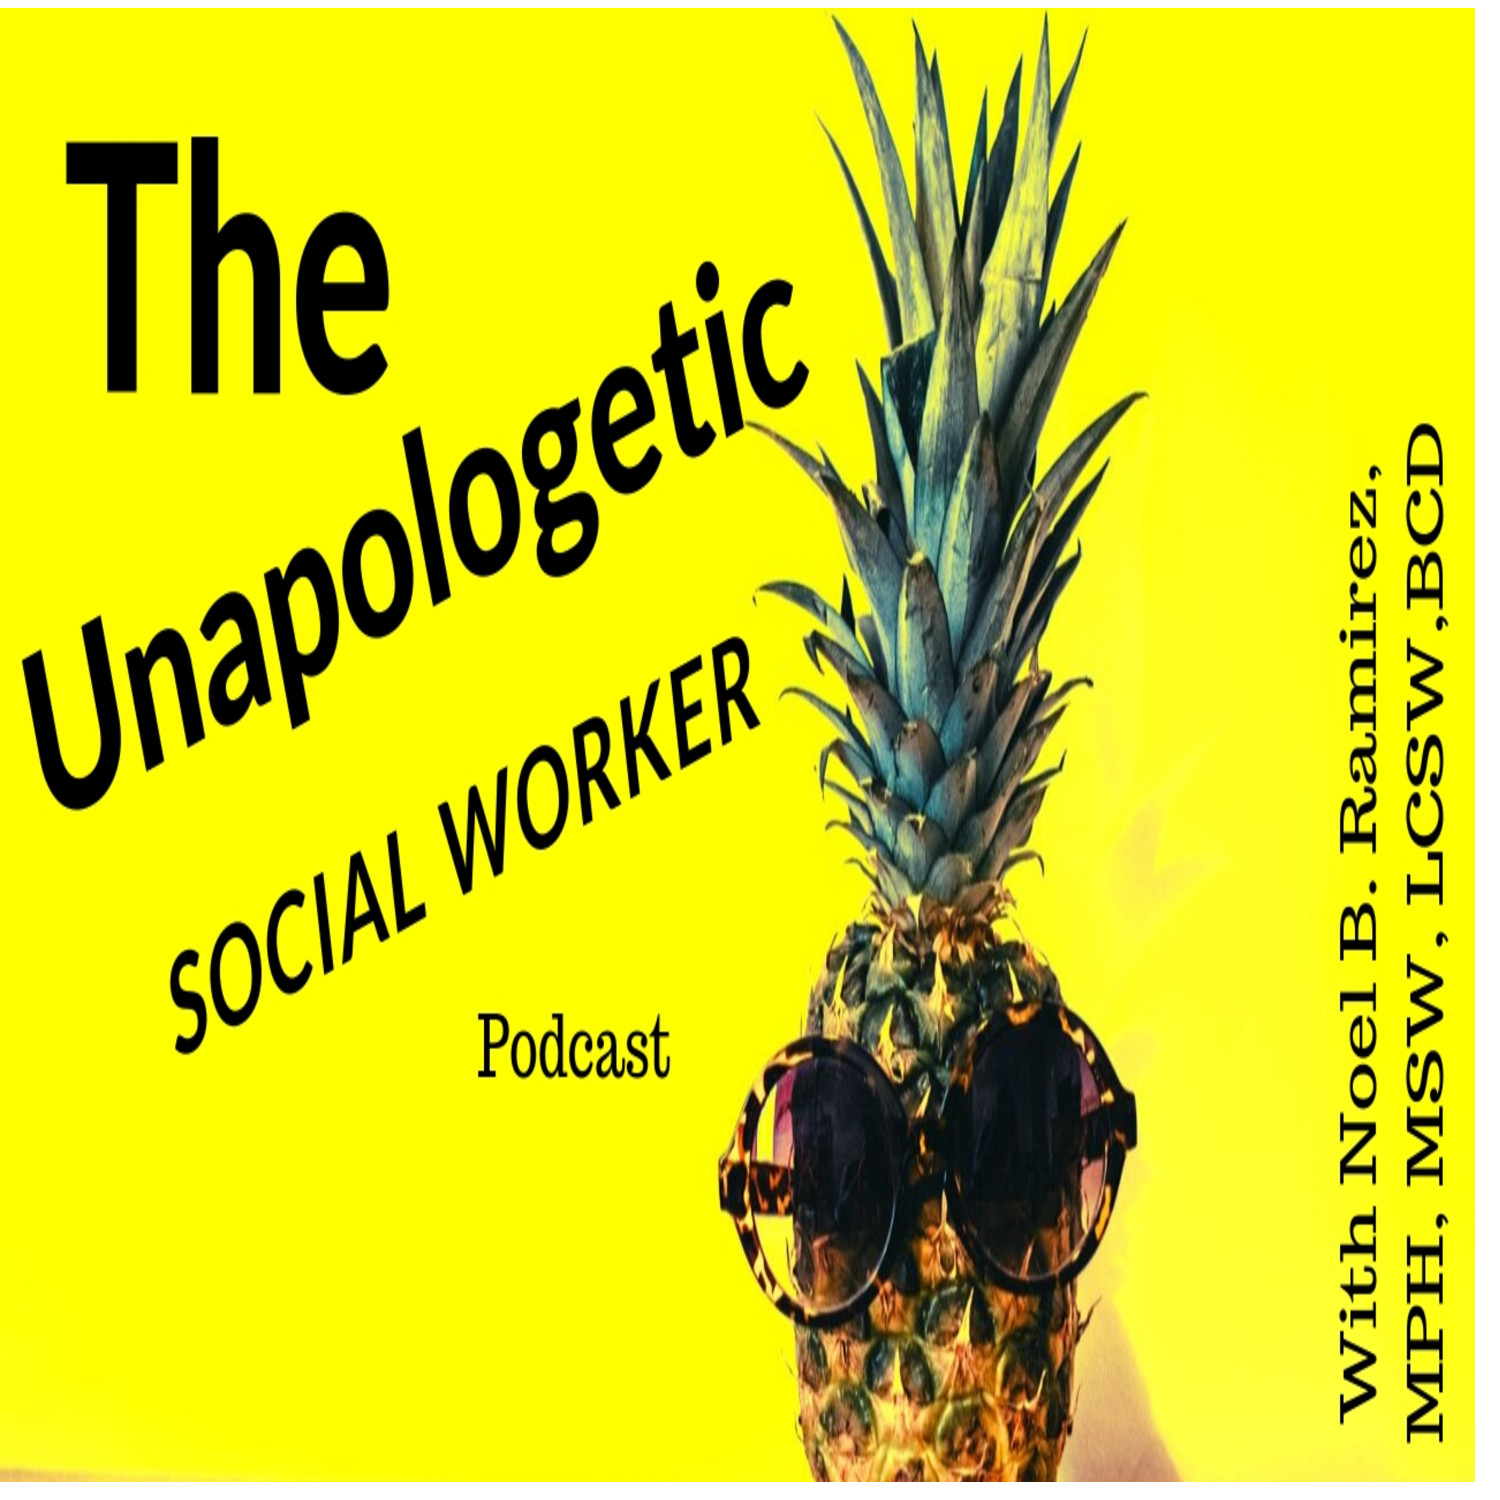 The unapologeticsocialworker's Podcast